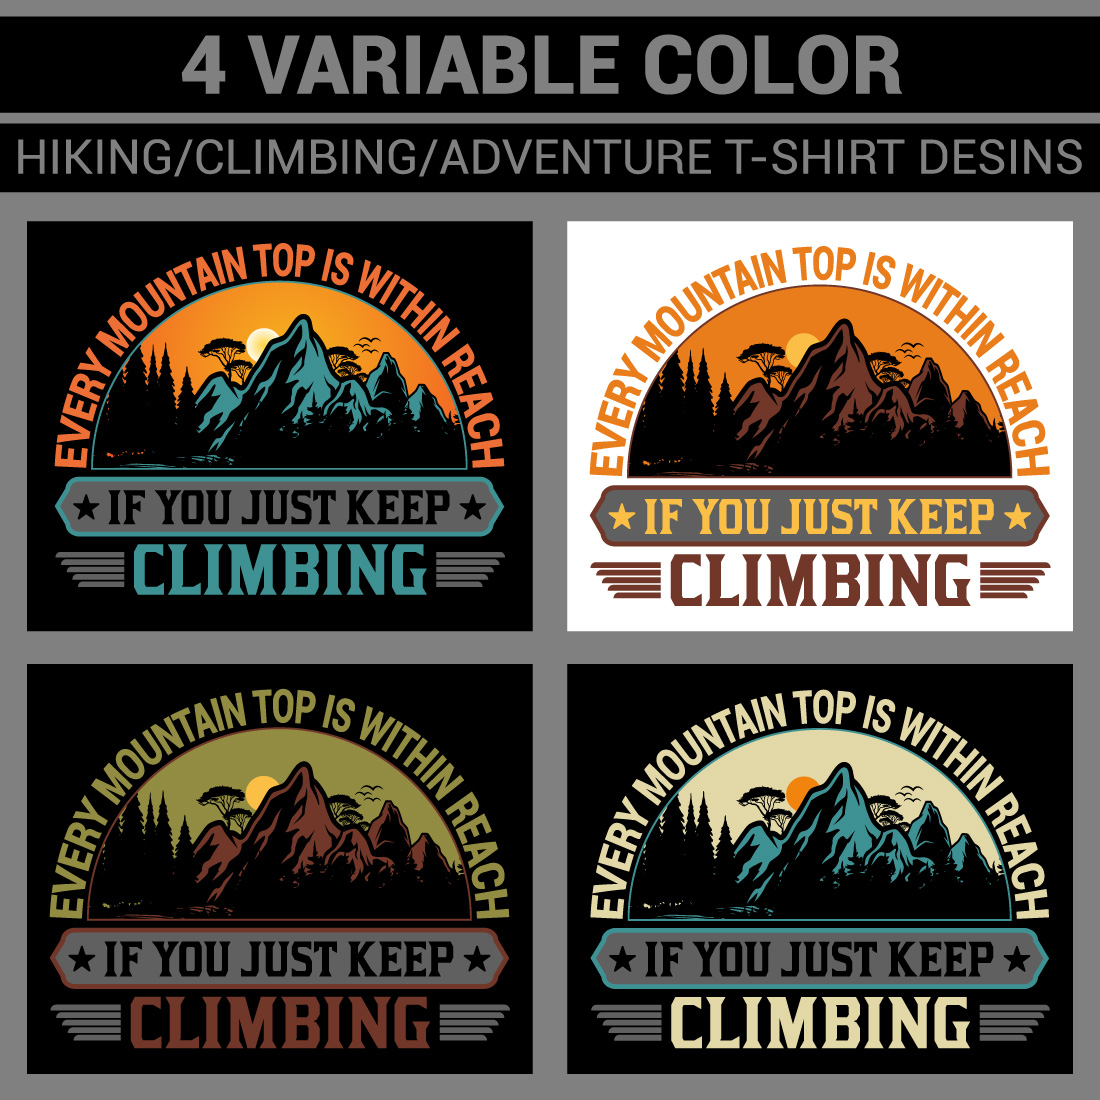 4 variable color HIKING/CLIMBING/ADVENTURE T-shirt designs preview image.